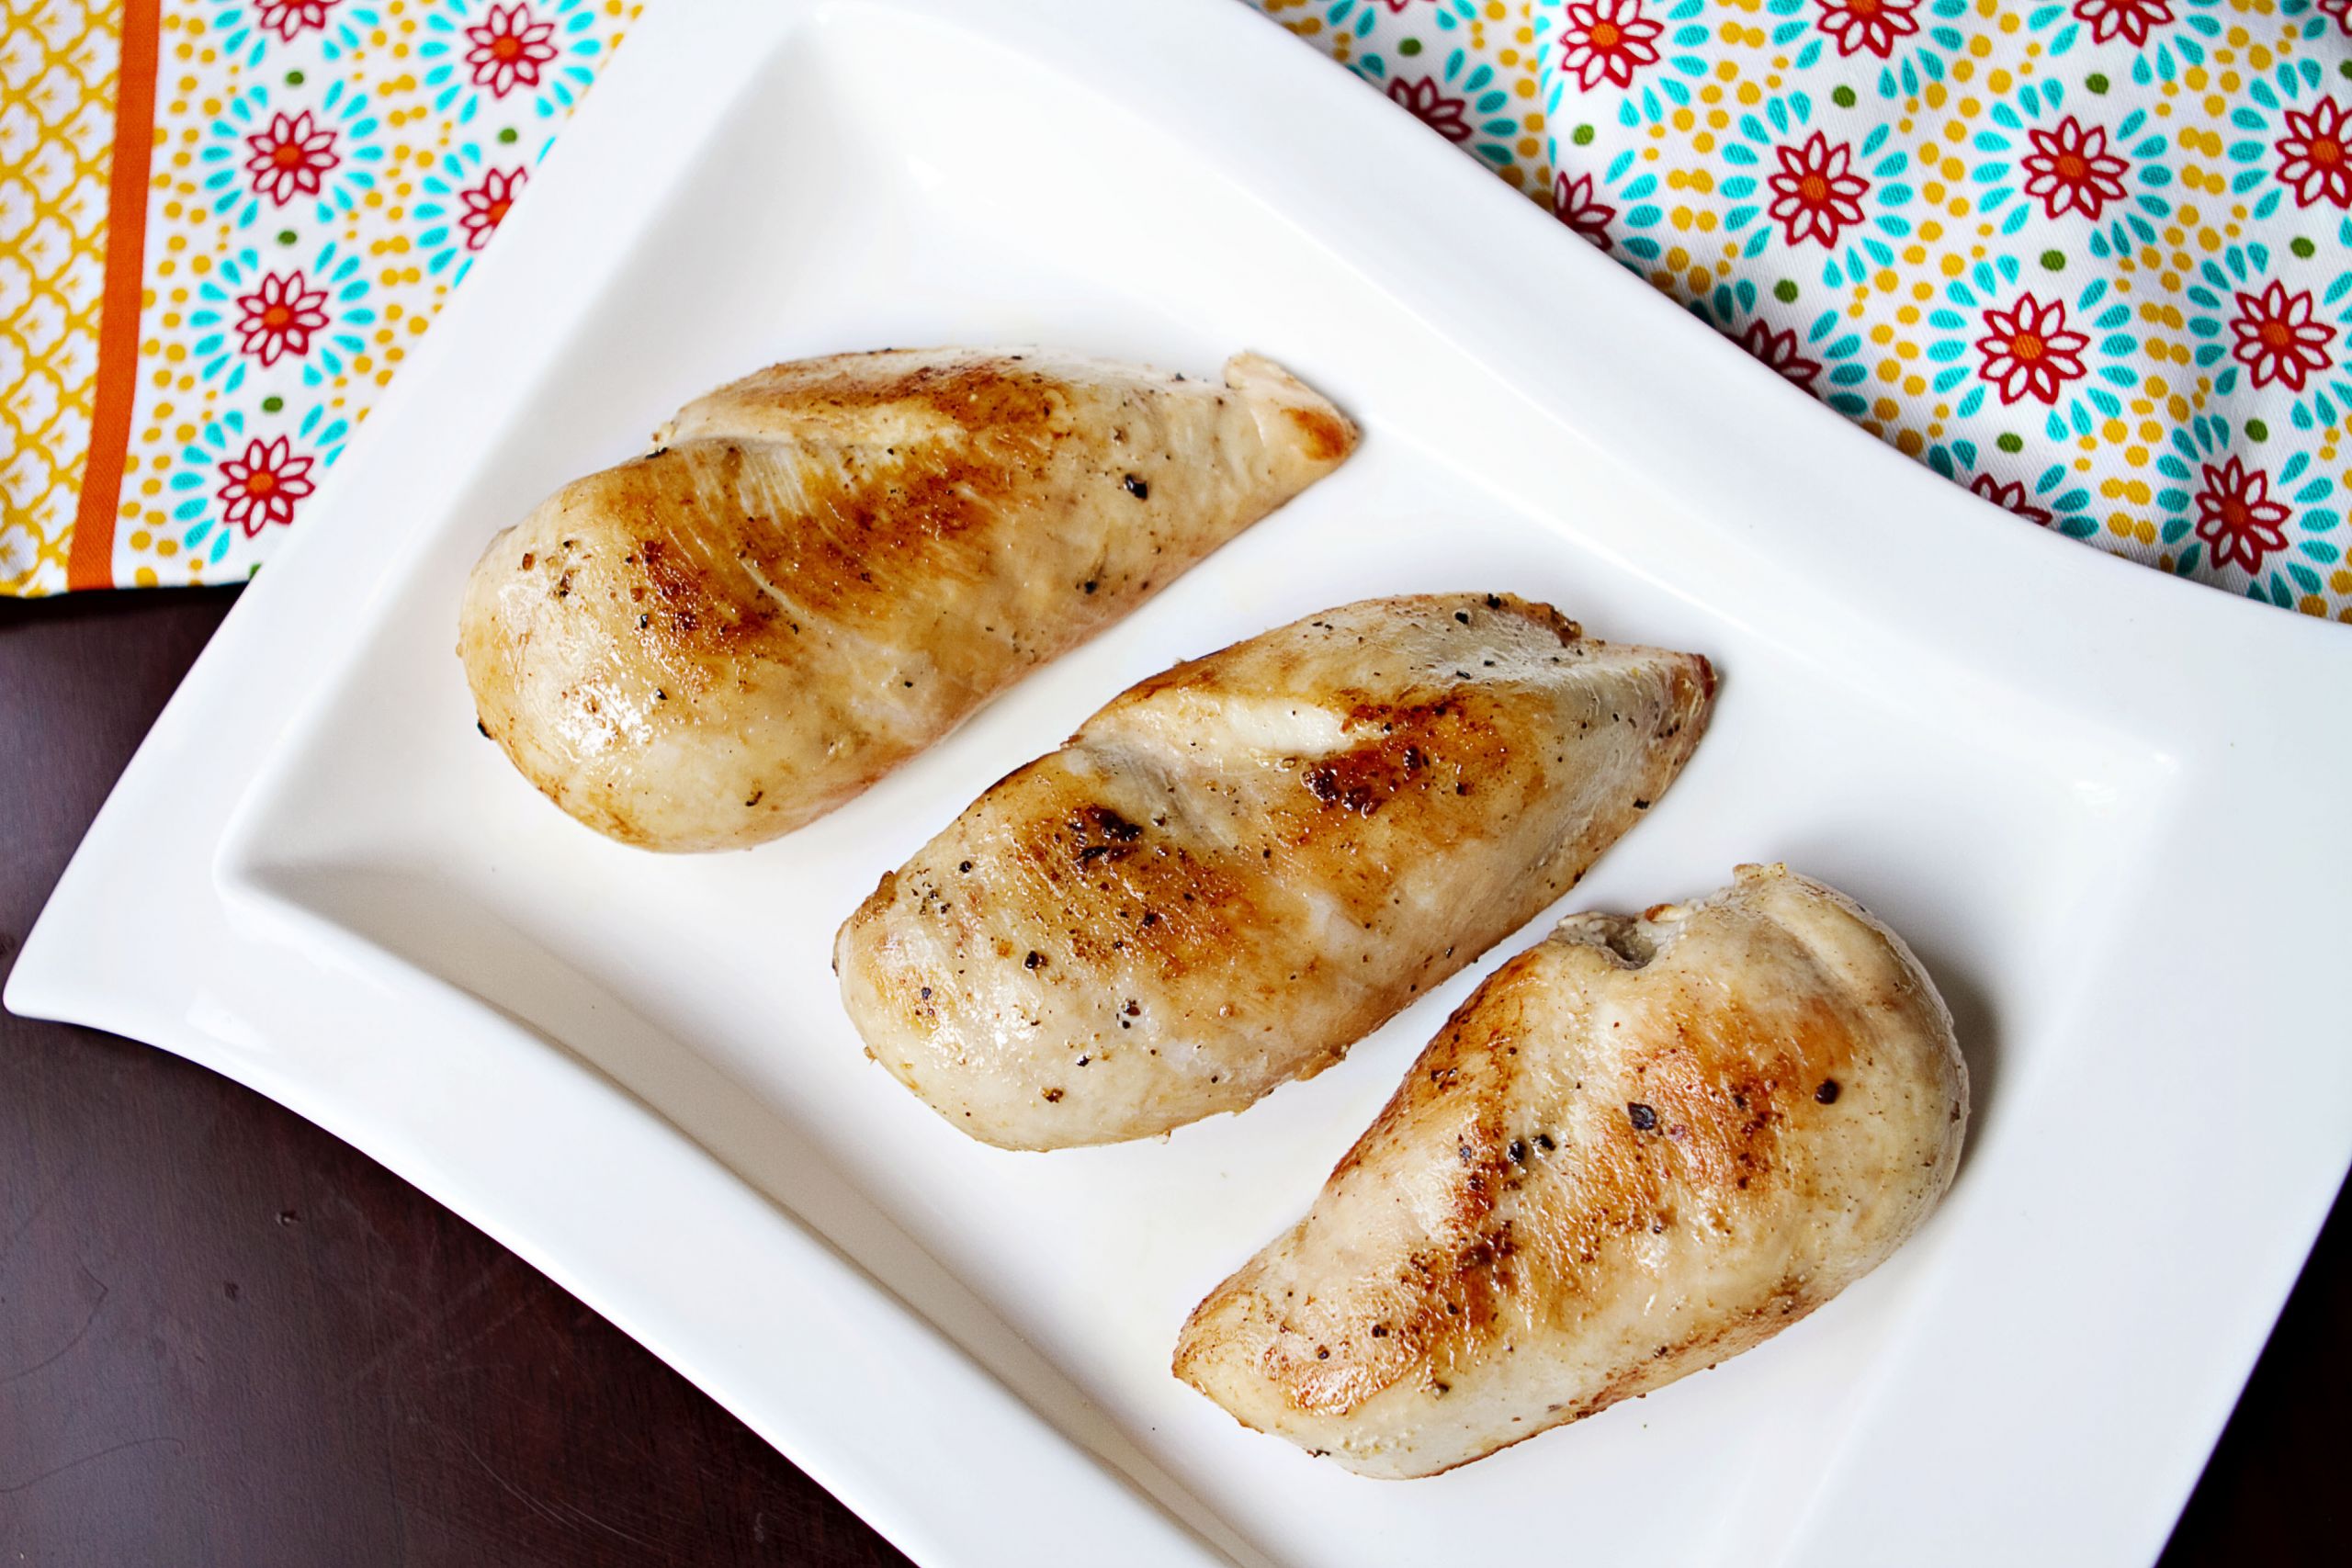 Microwave Chicken Breasts
 How to Cook Moist and Tender Chicken Breasts in 3 Easy